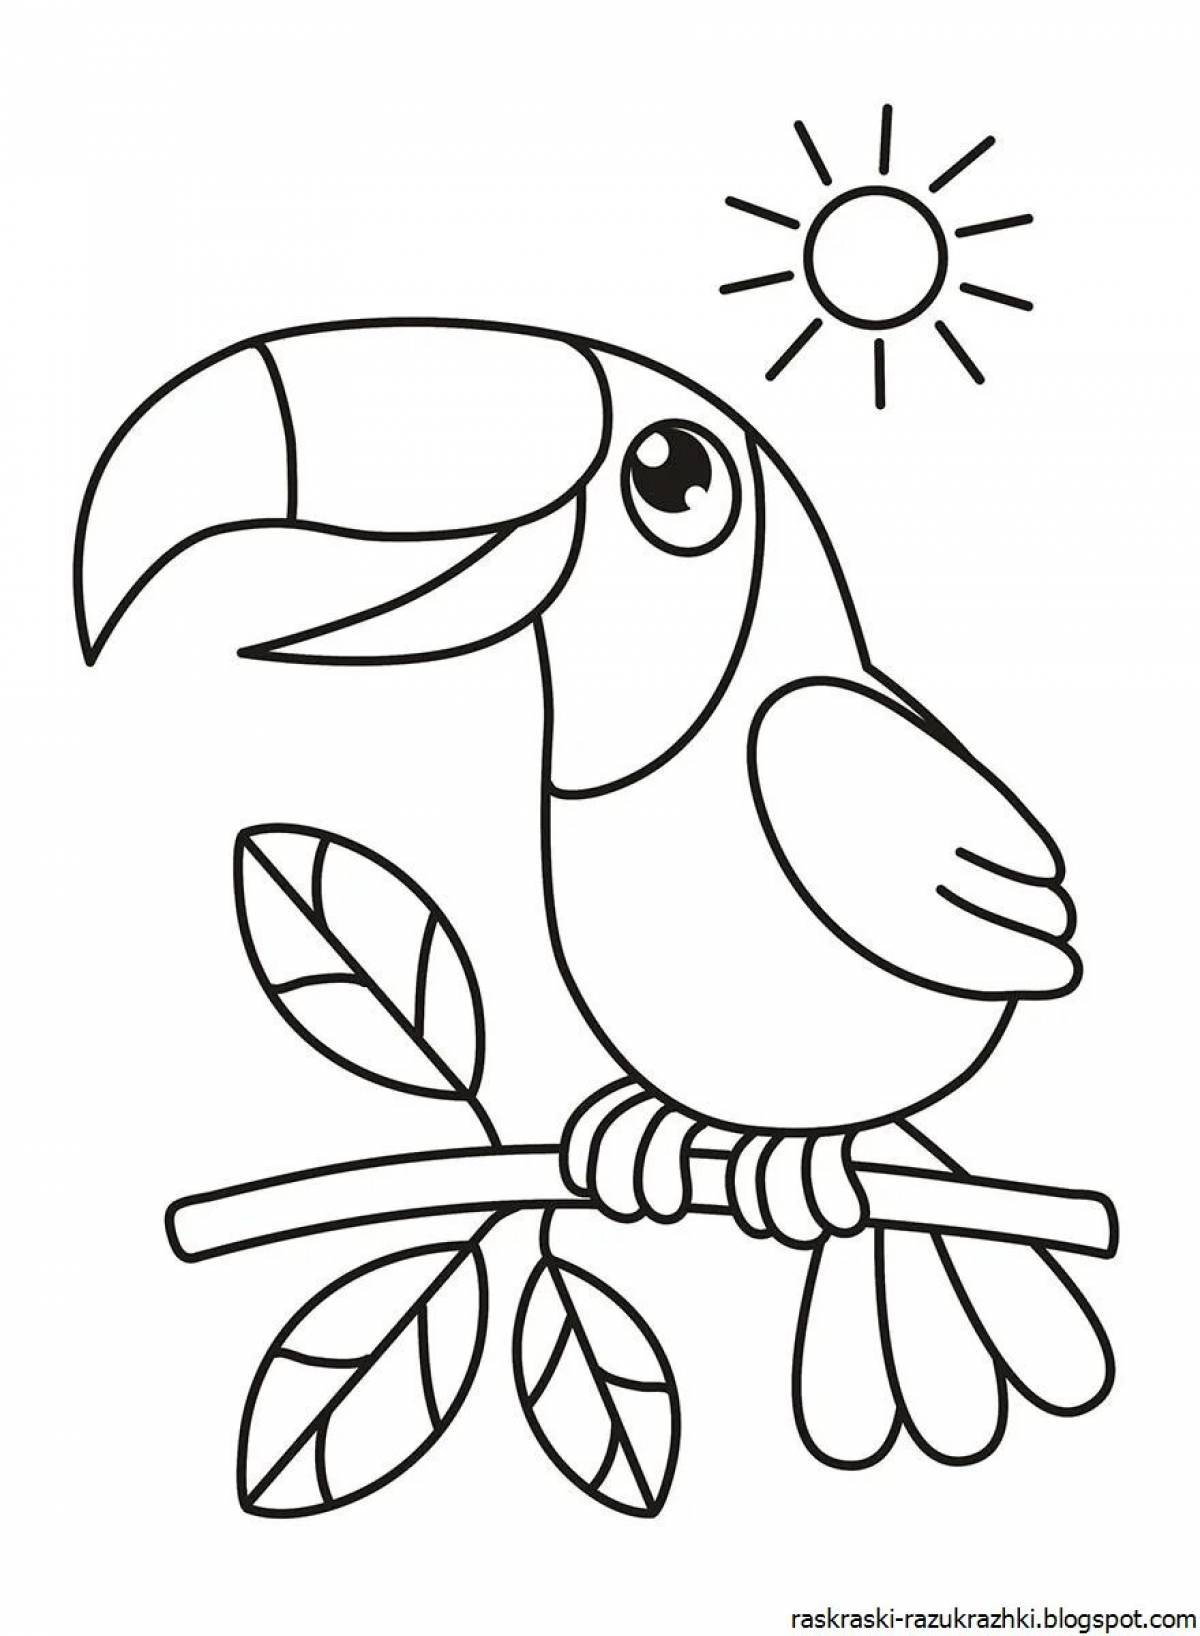 Amazing bird coloring page for kids